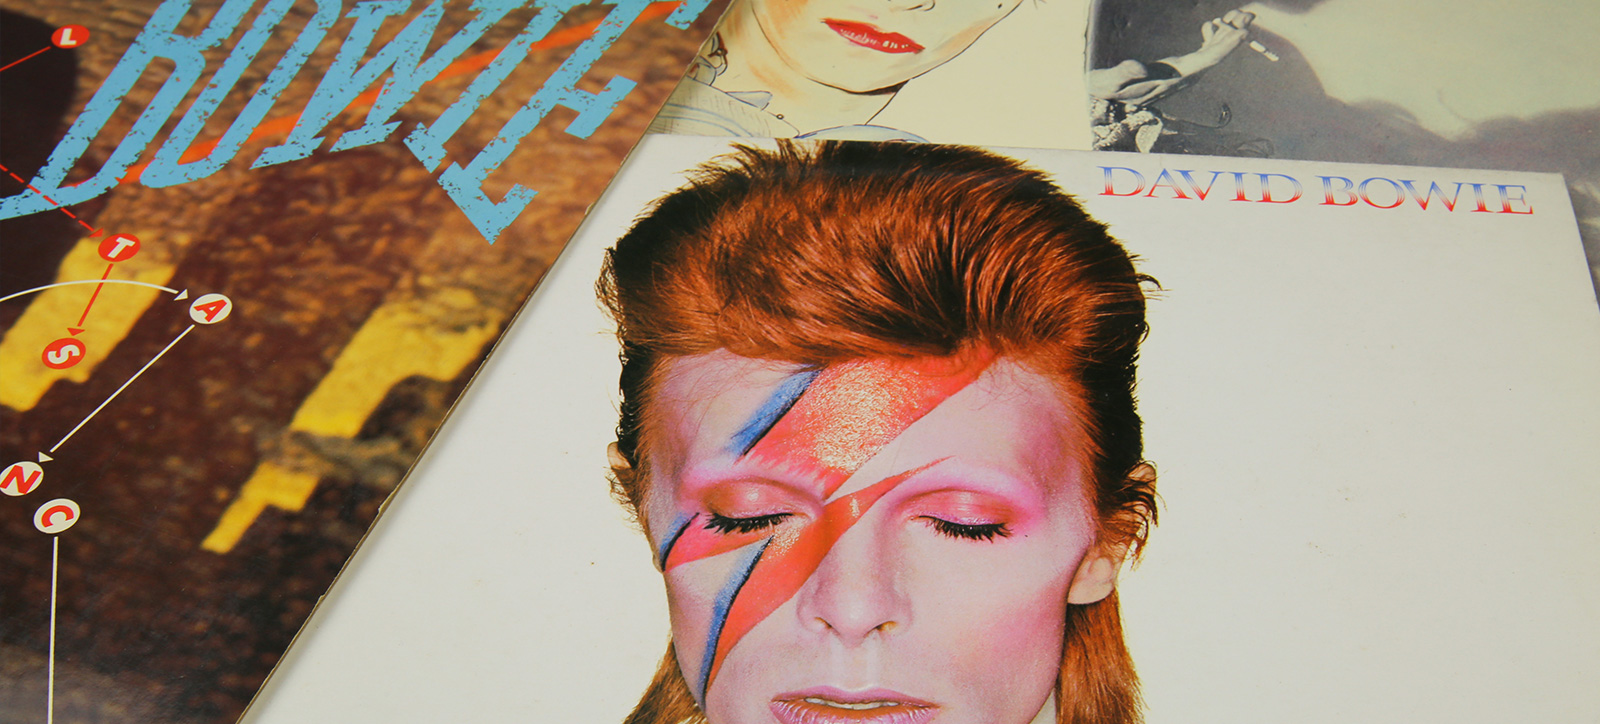 Picture of a David Bowie album cover